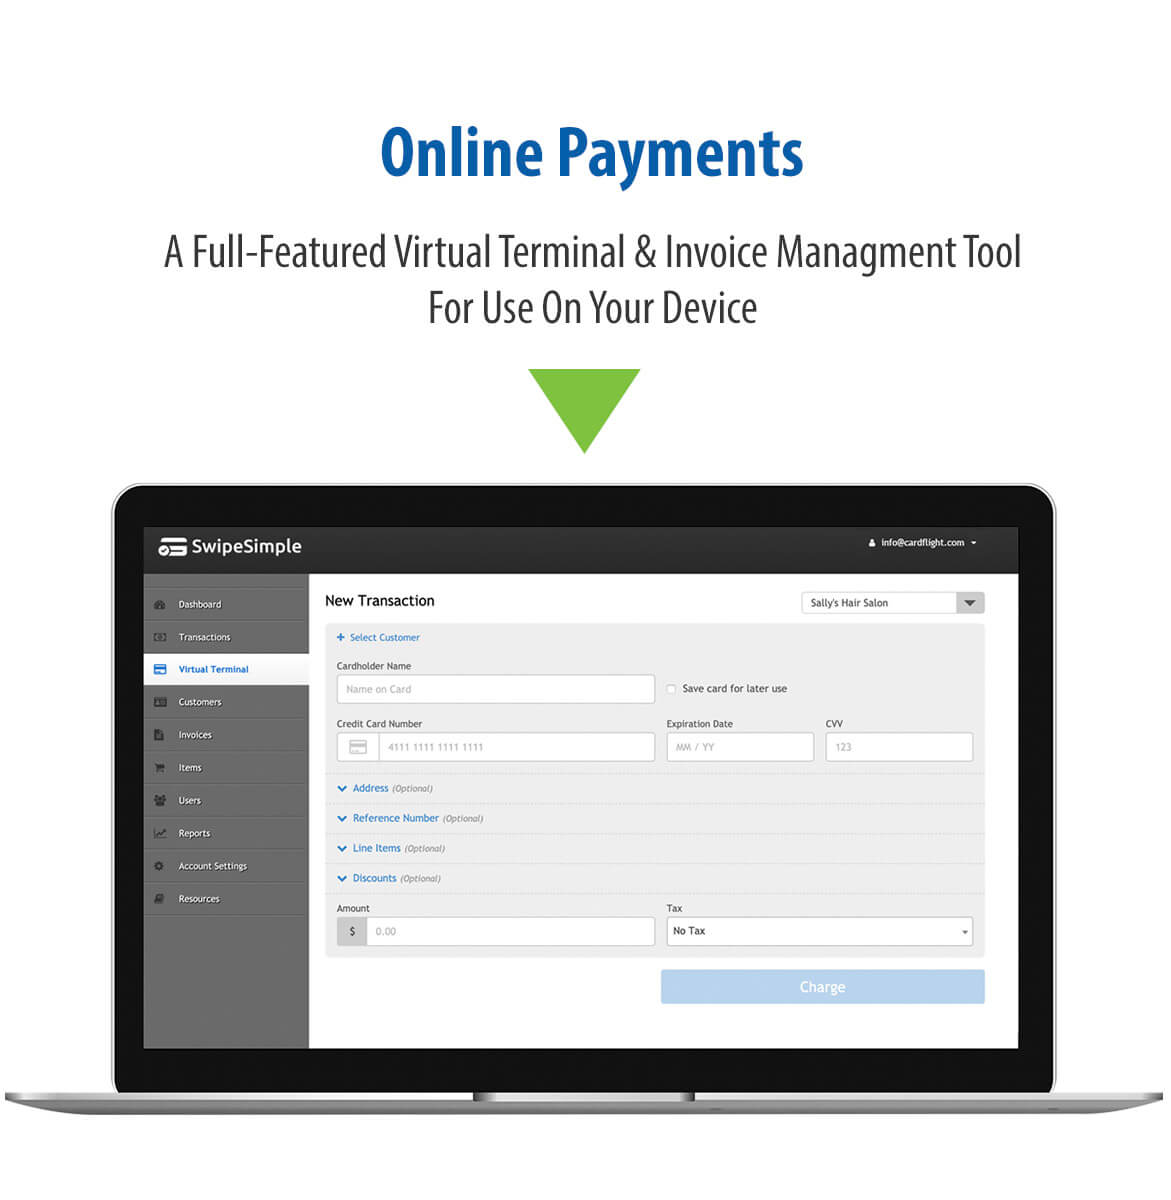 SwipeSimple gateway offers A Full-Featured Virtual Terminal & Invoice Managment Tool